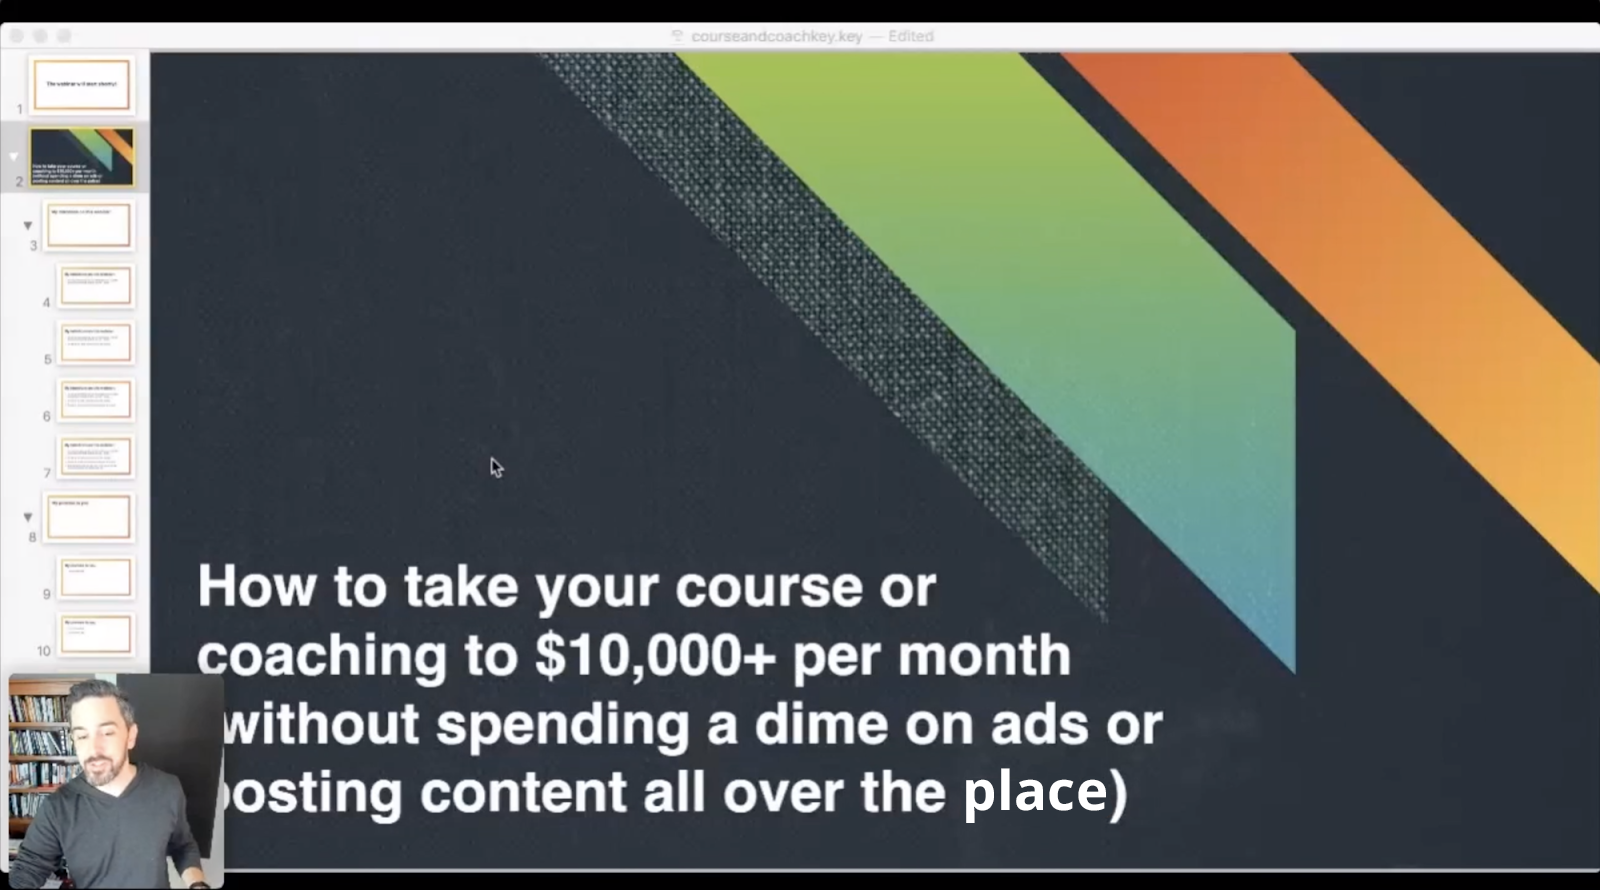 "How to take your course or coaching to $10K per month without spending a dime on ads or posting content all over the place" was Bryan's monthly webinar that drove dozens of leads.